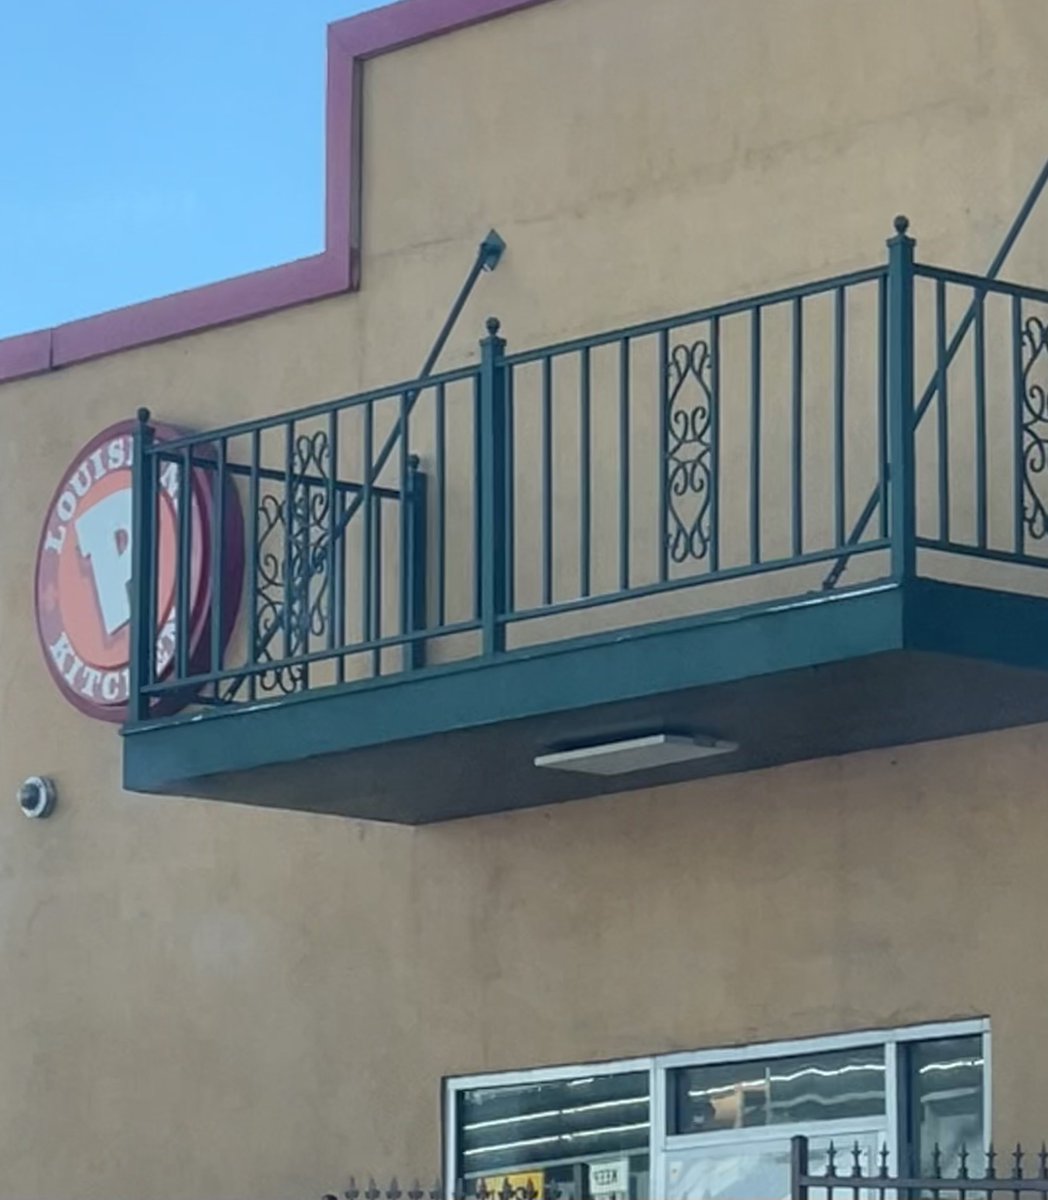 RT @theglennisshow: what if we kissed on the purely decorative Popeyes balcony https://t.co/PNvQzOGP3N